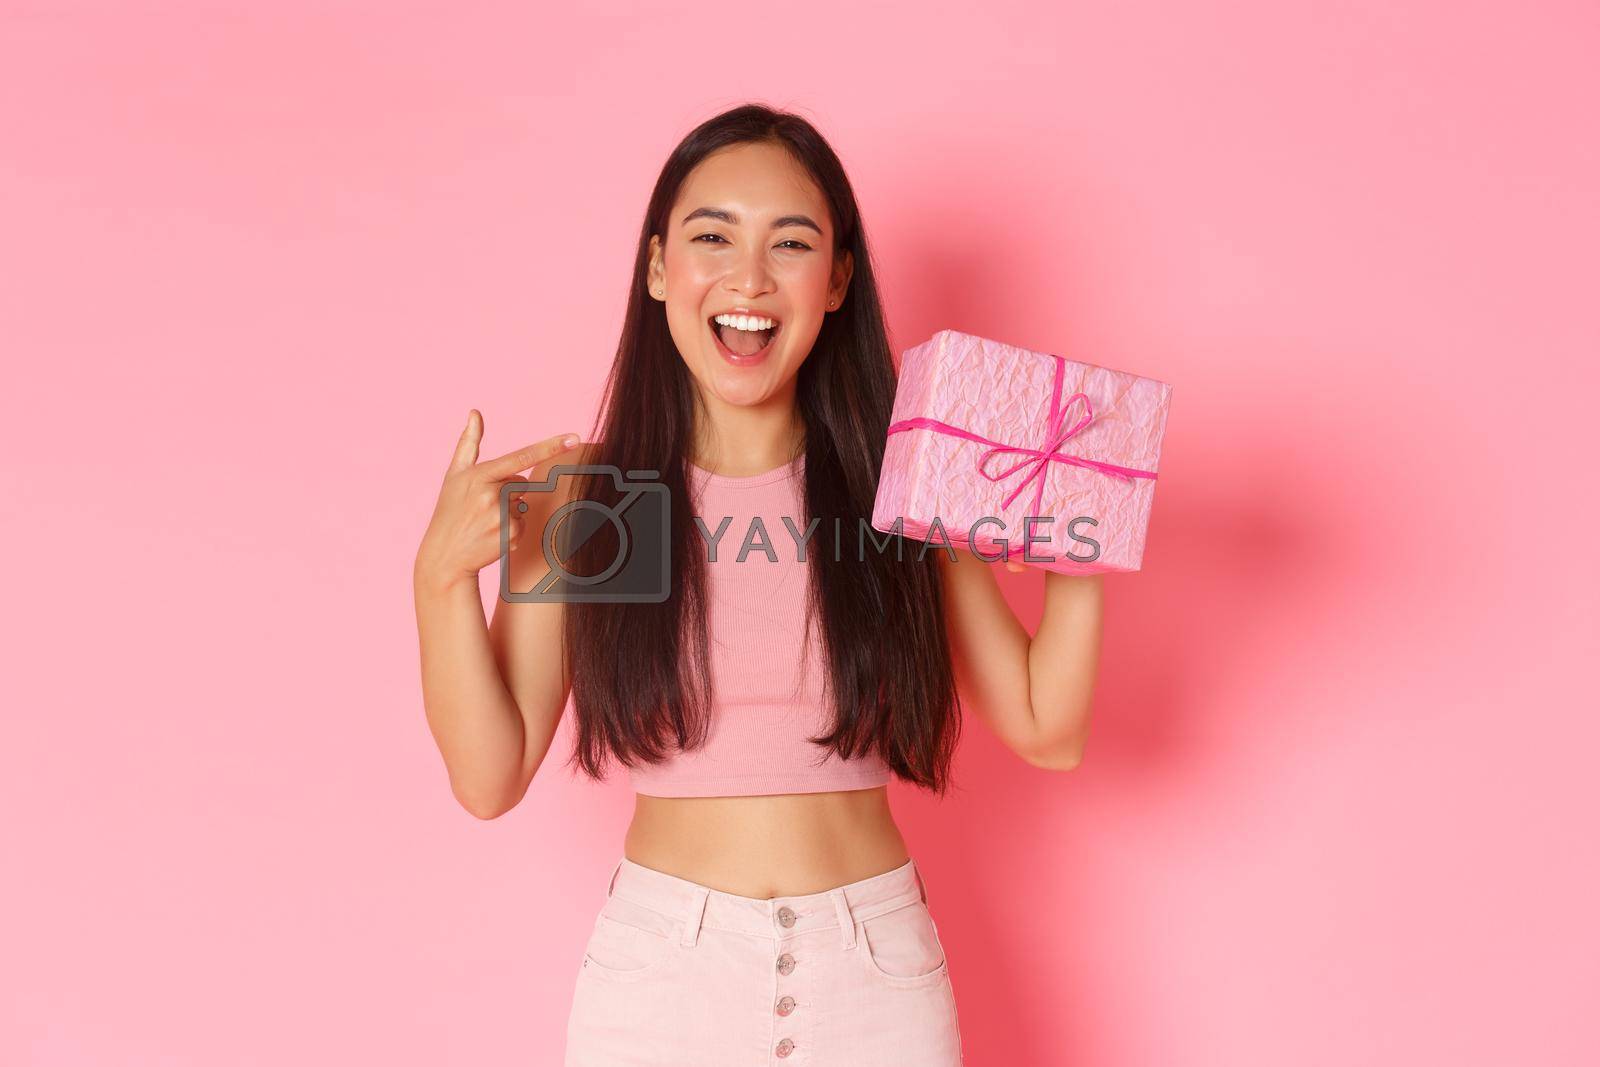 Holidays, celebration and lifestyle concept. Beautiful happy asian girl pointing at herself, its her birthday, receive gift wrapped in pink paper, smiling broadly over studio background.